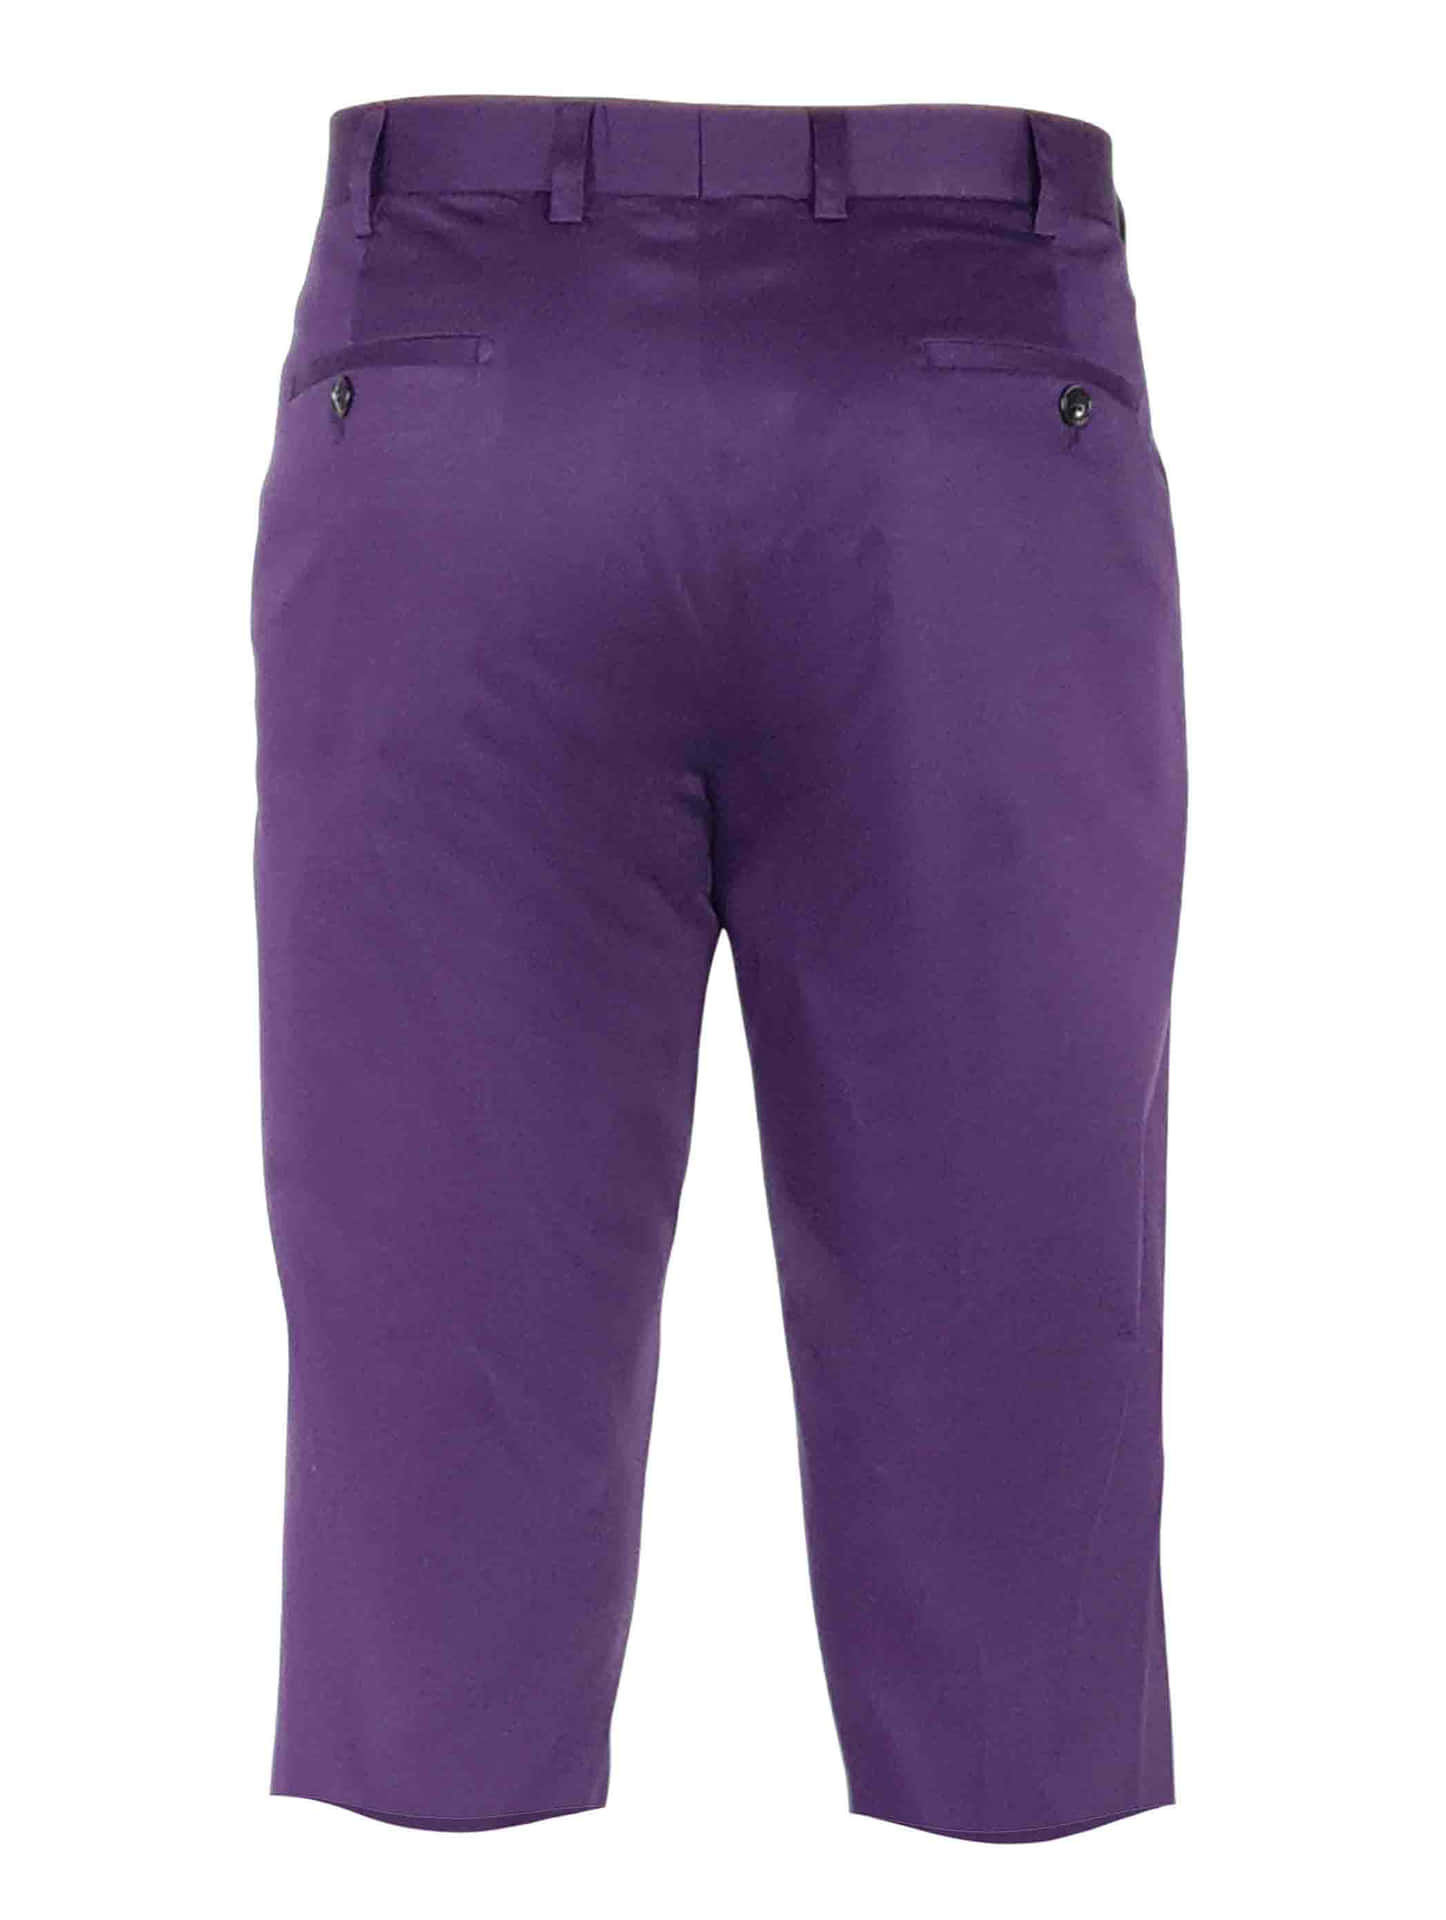 Image  Stand Out With A Pair Of Purple Shorts Wallpaper